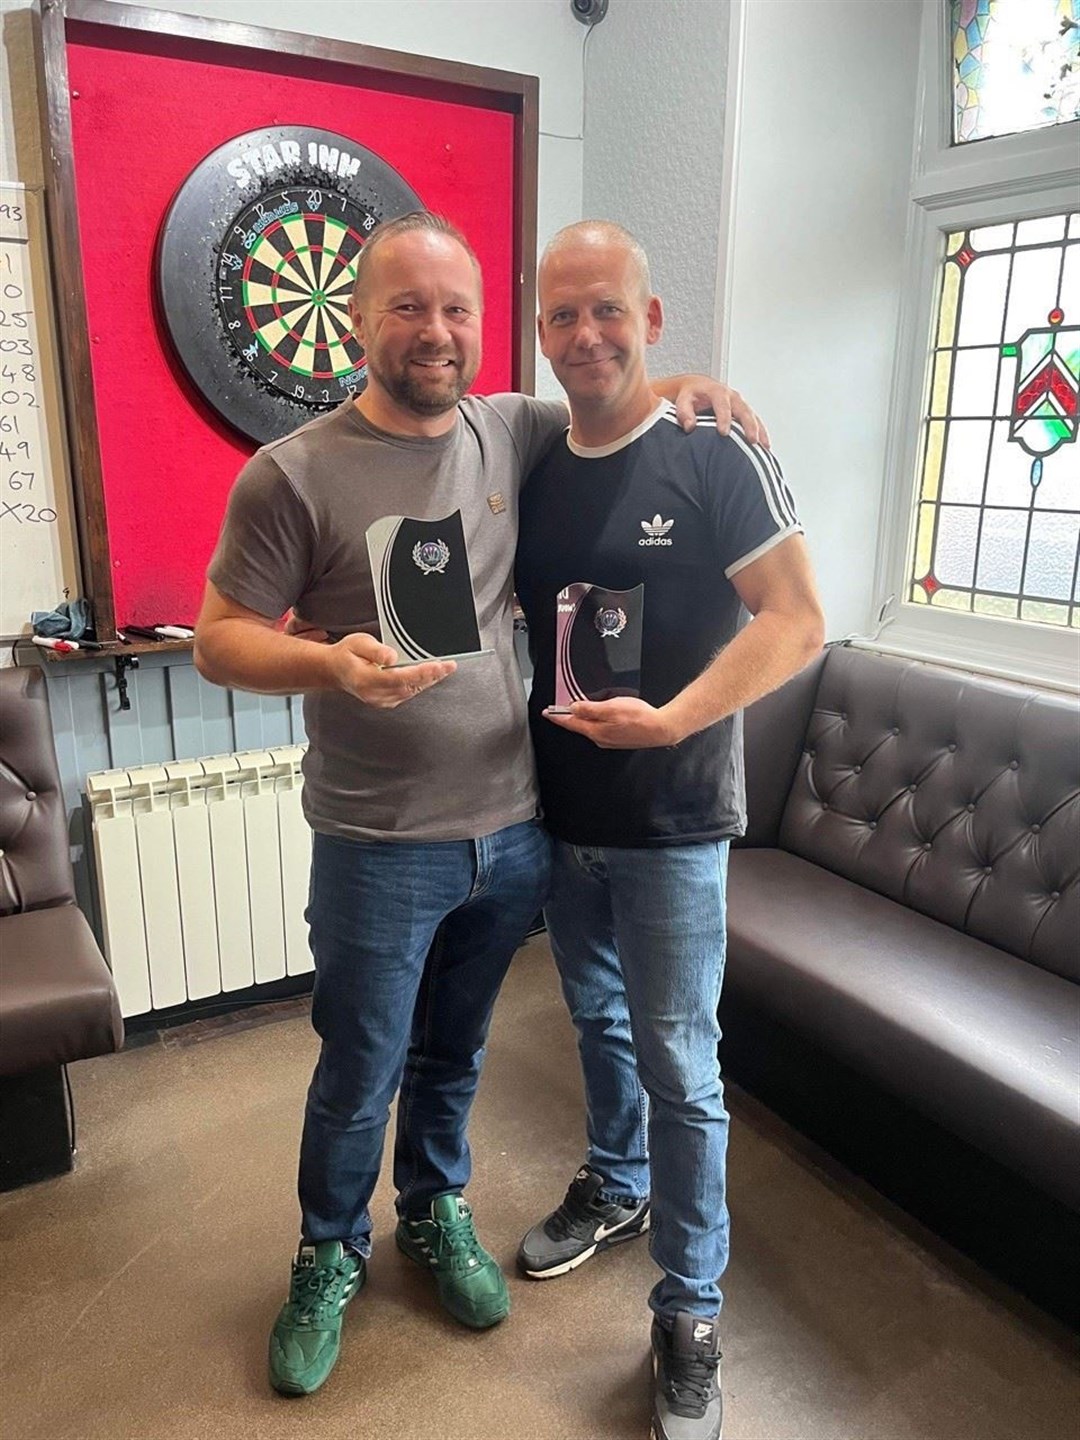 Darts winners Andy and Kevin.